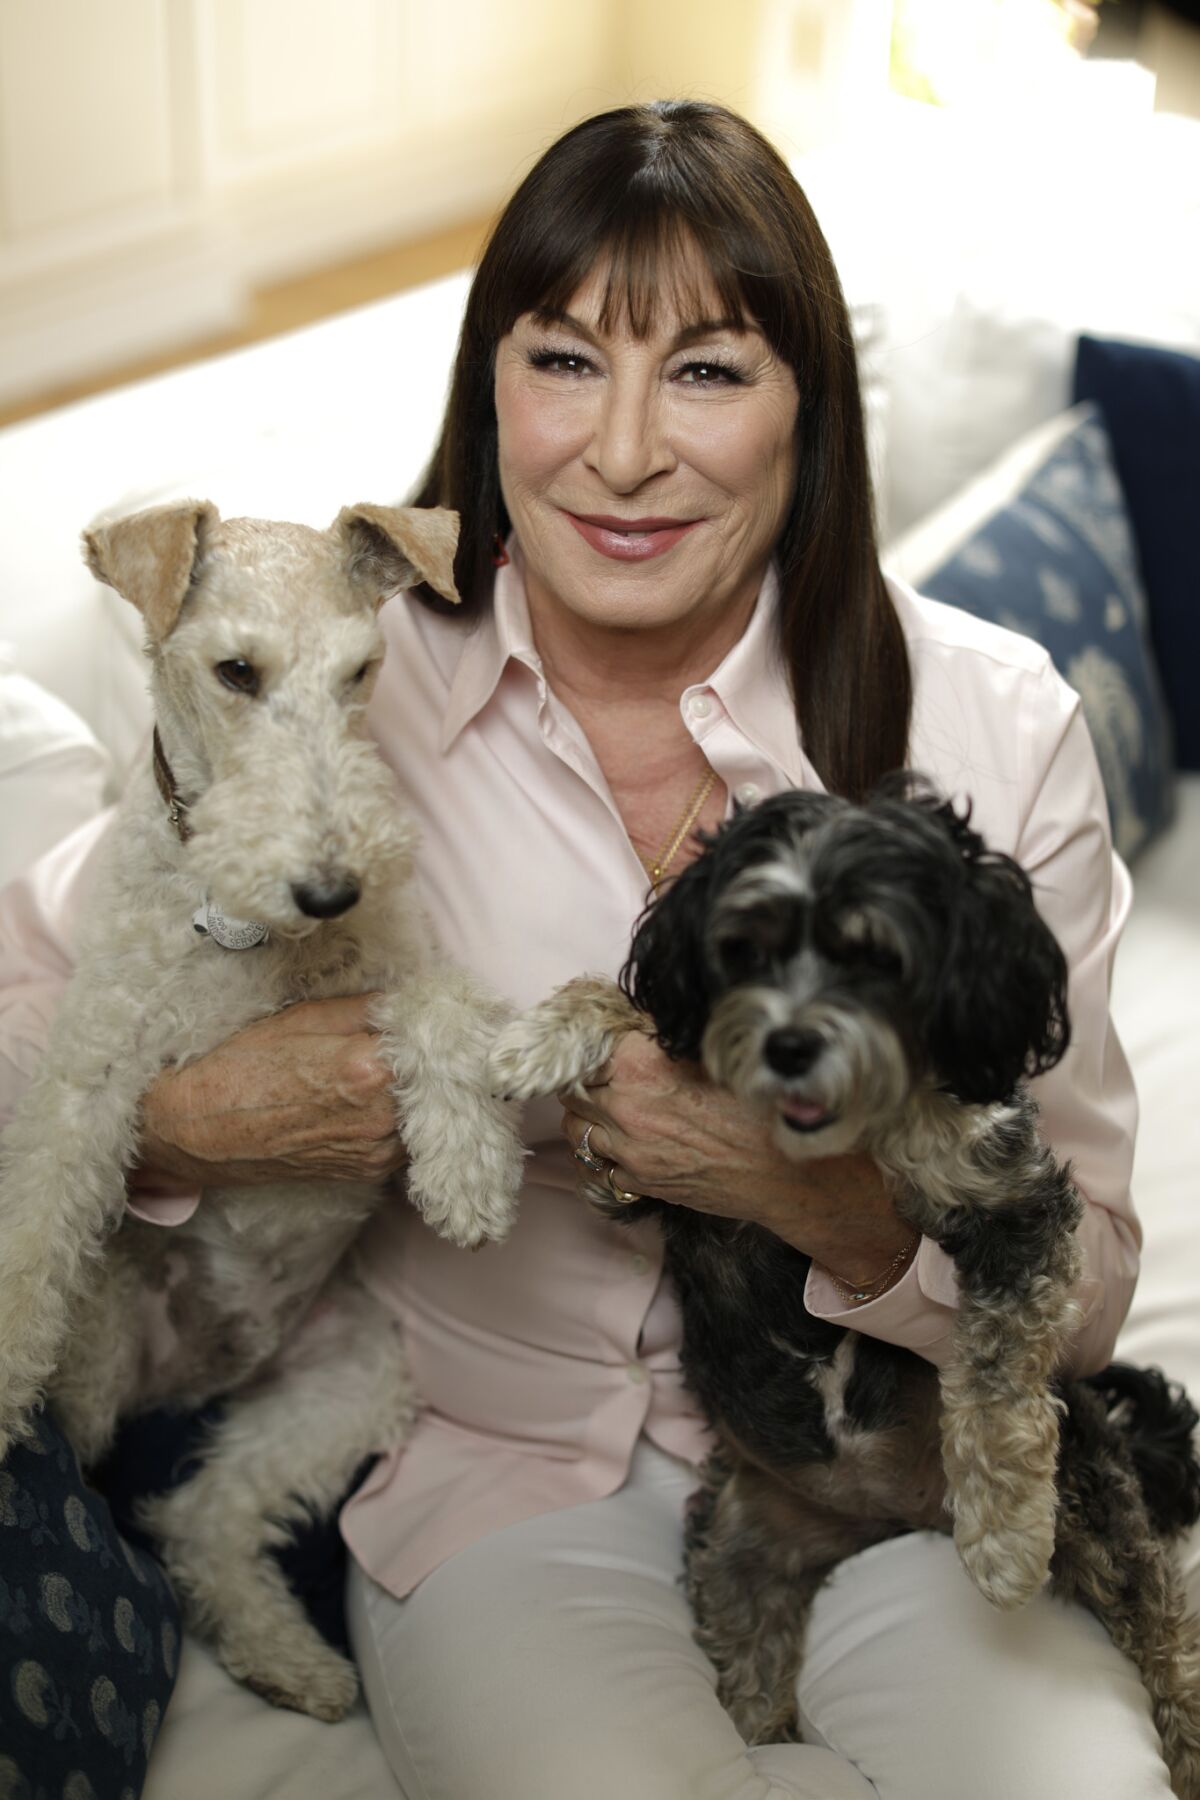 Anjelica Huston at home with her dogs, Oscar, left, and Pootie.